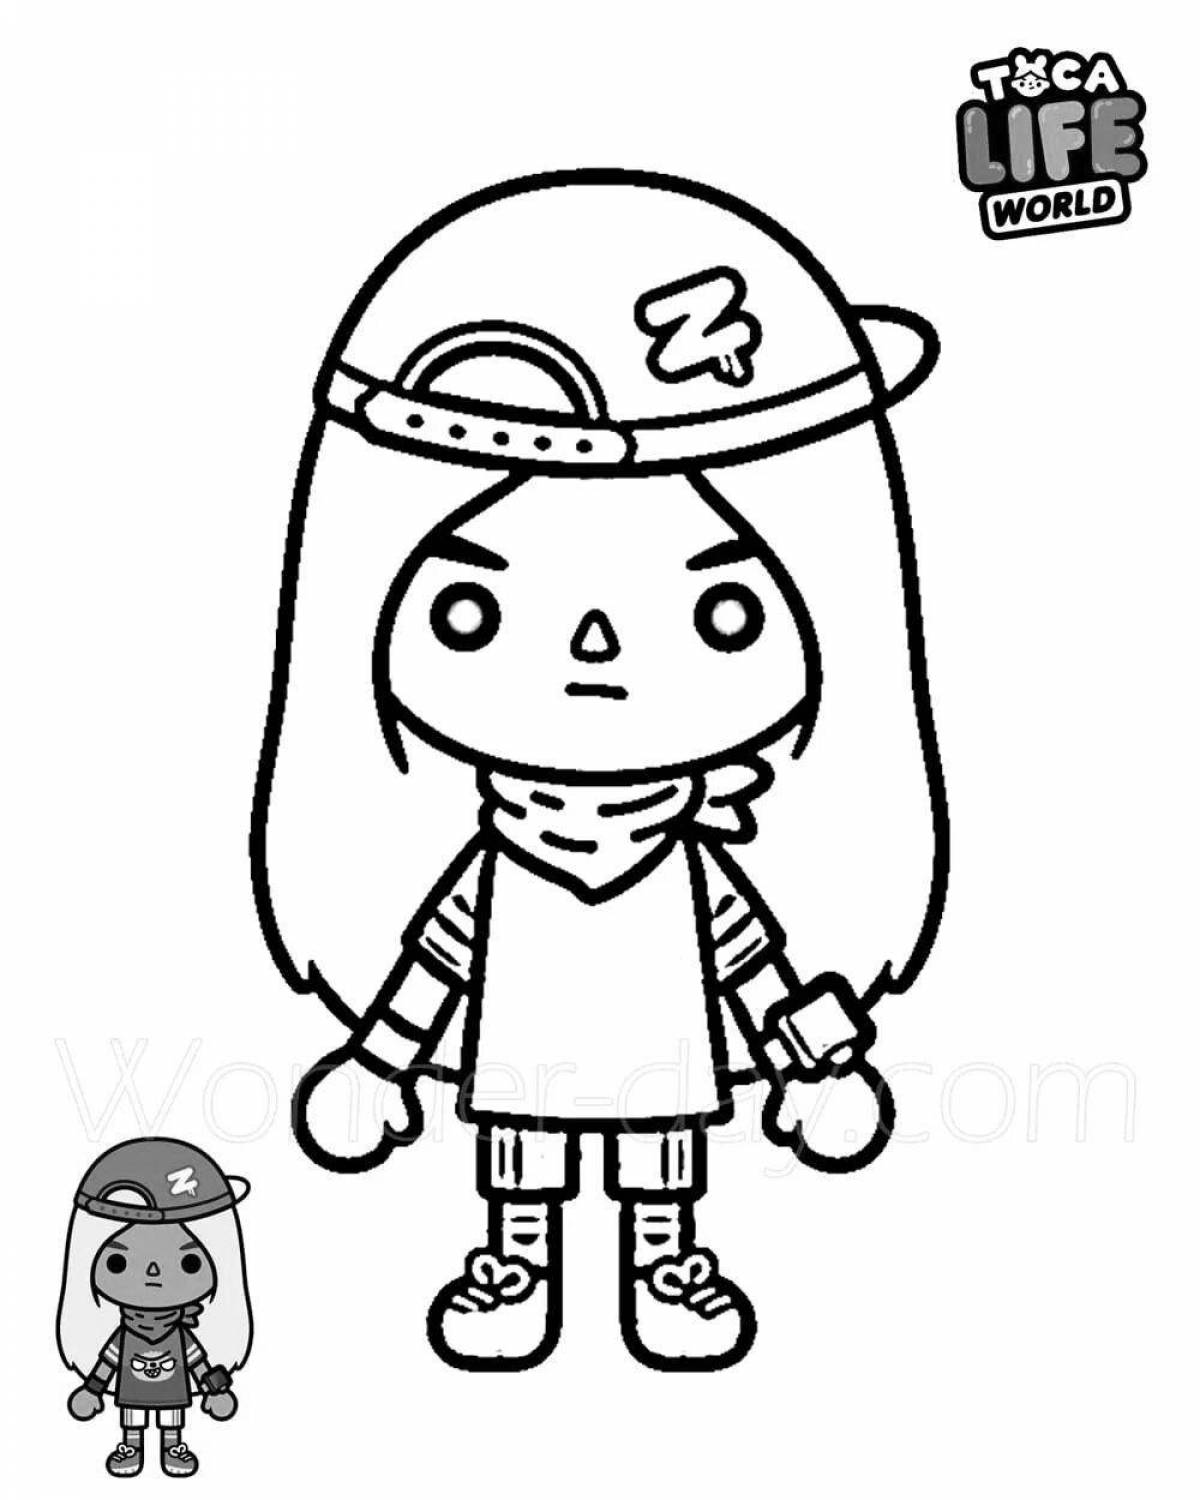 Toca life world coloring page